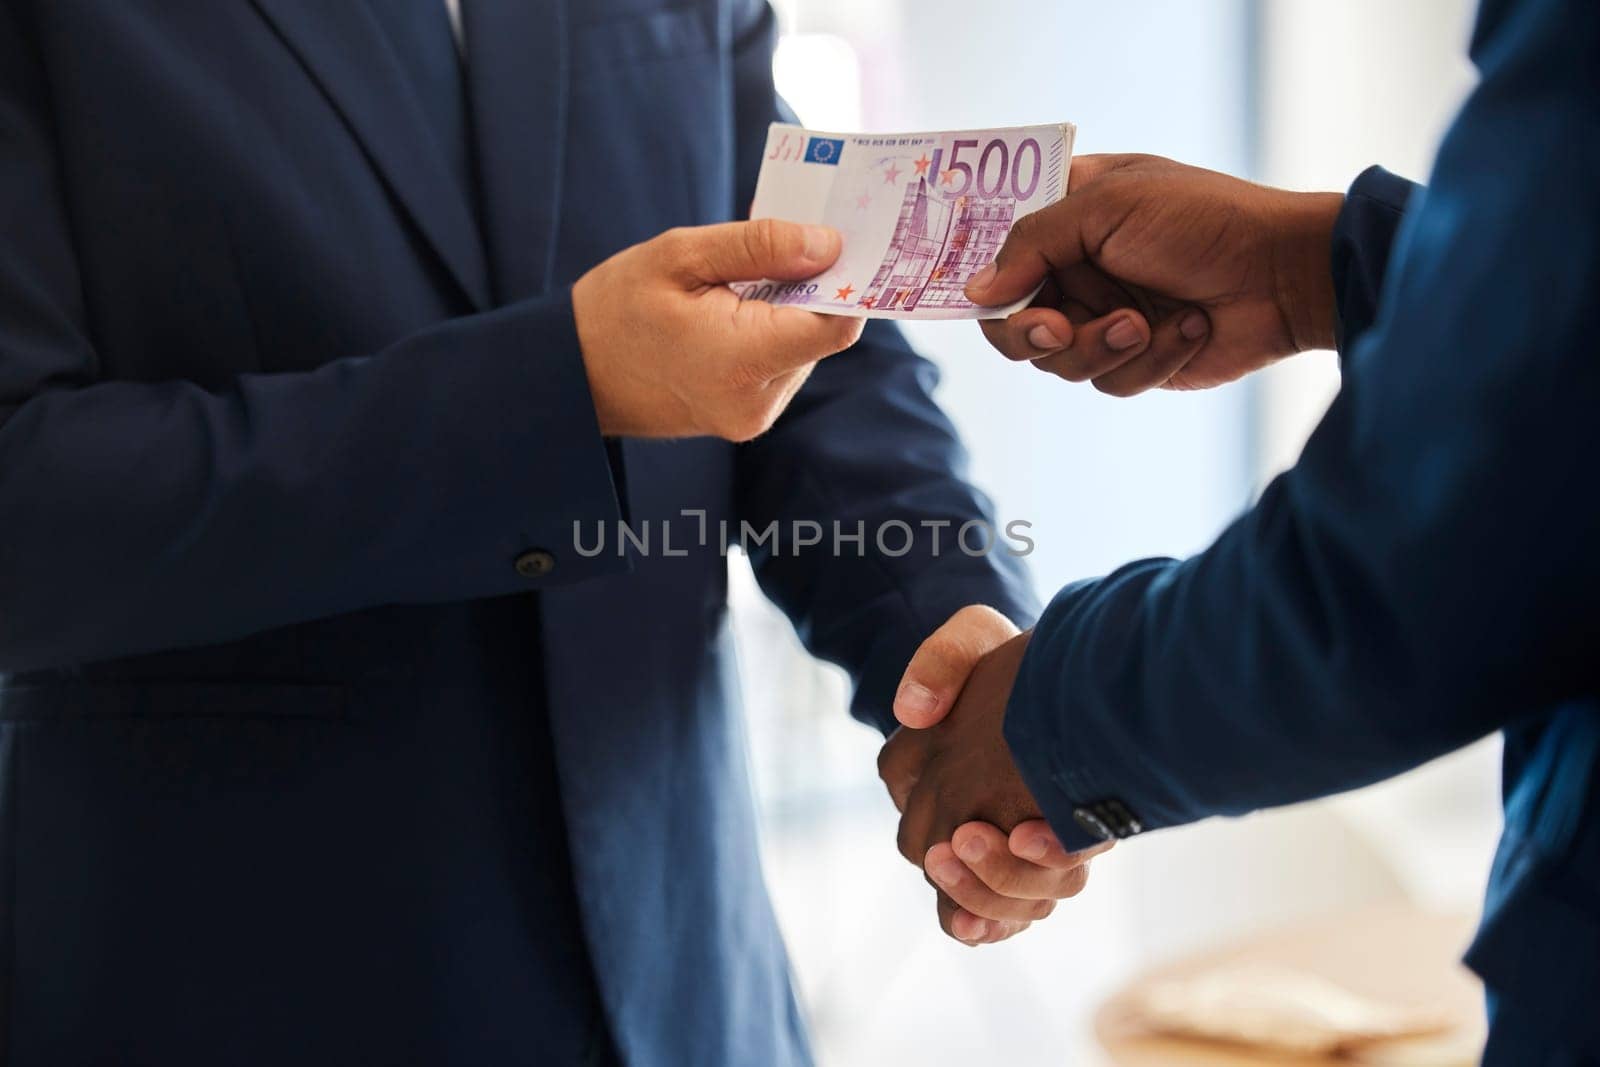 Business fraud, corruption handshake and money deal, scam and criminal giving euro notes, bribery payment and illegal trading offer. Bad politician shaking hands for crime, cash and money laundering by YuriArcurs